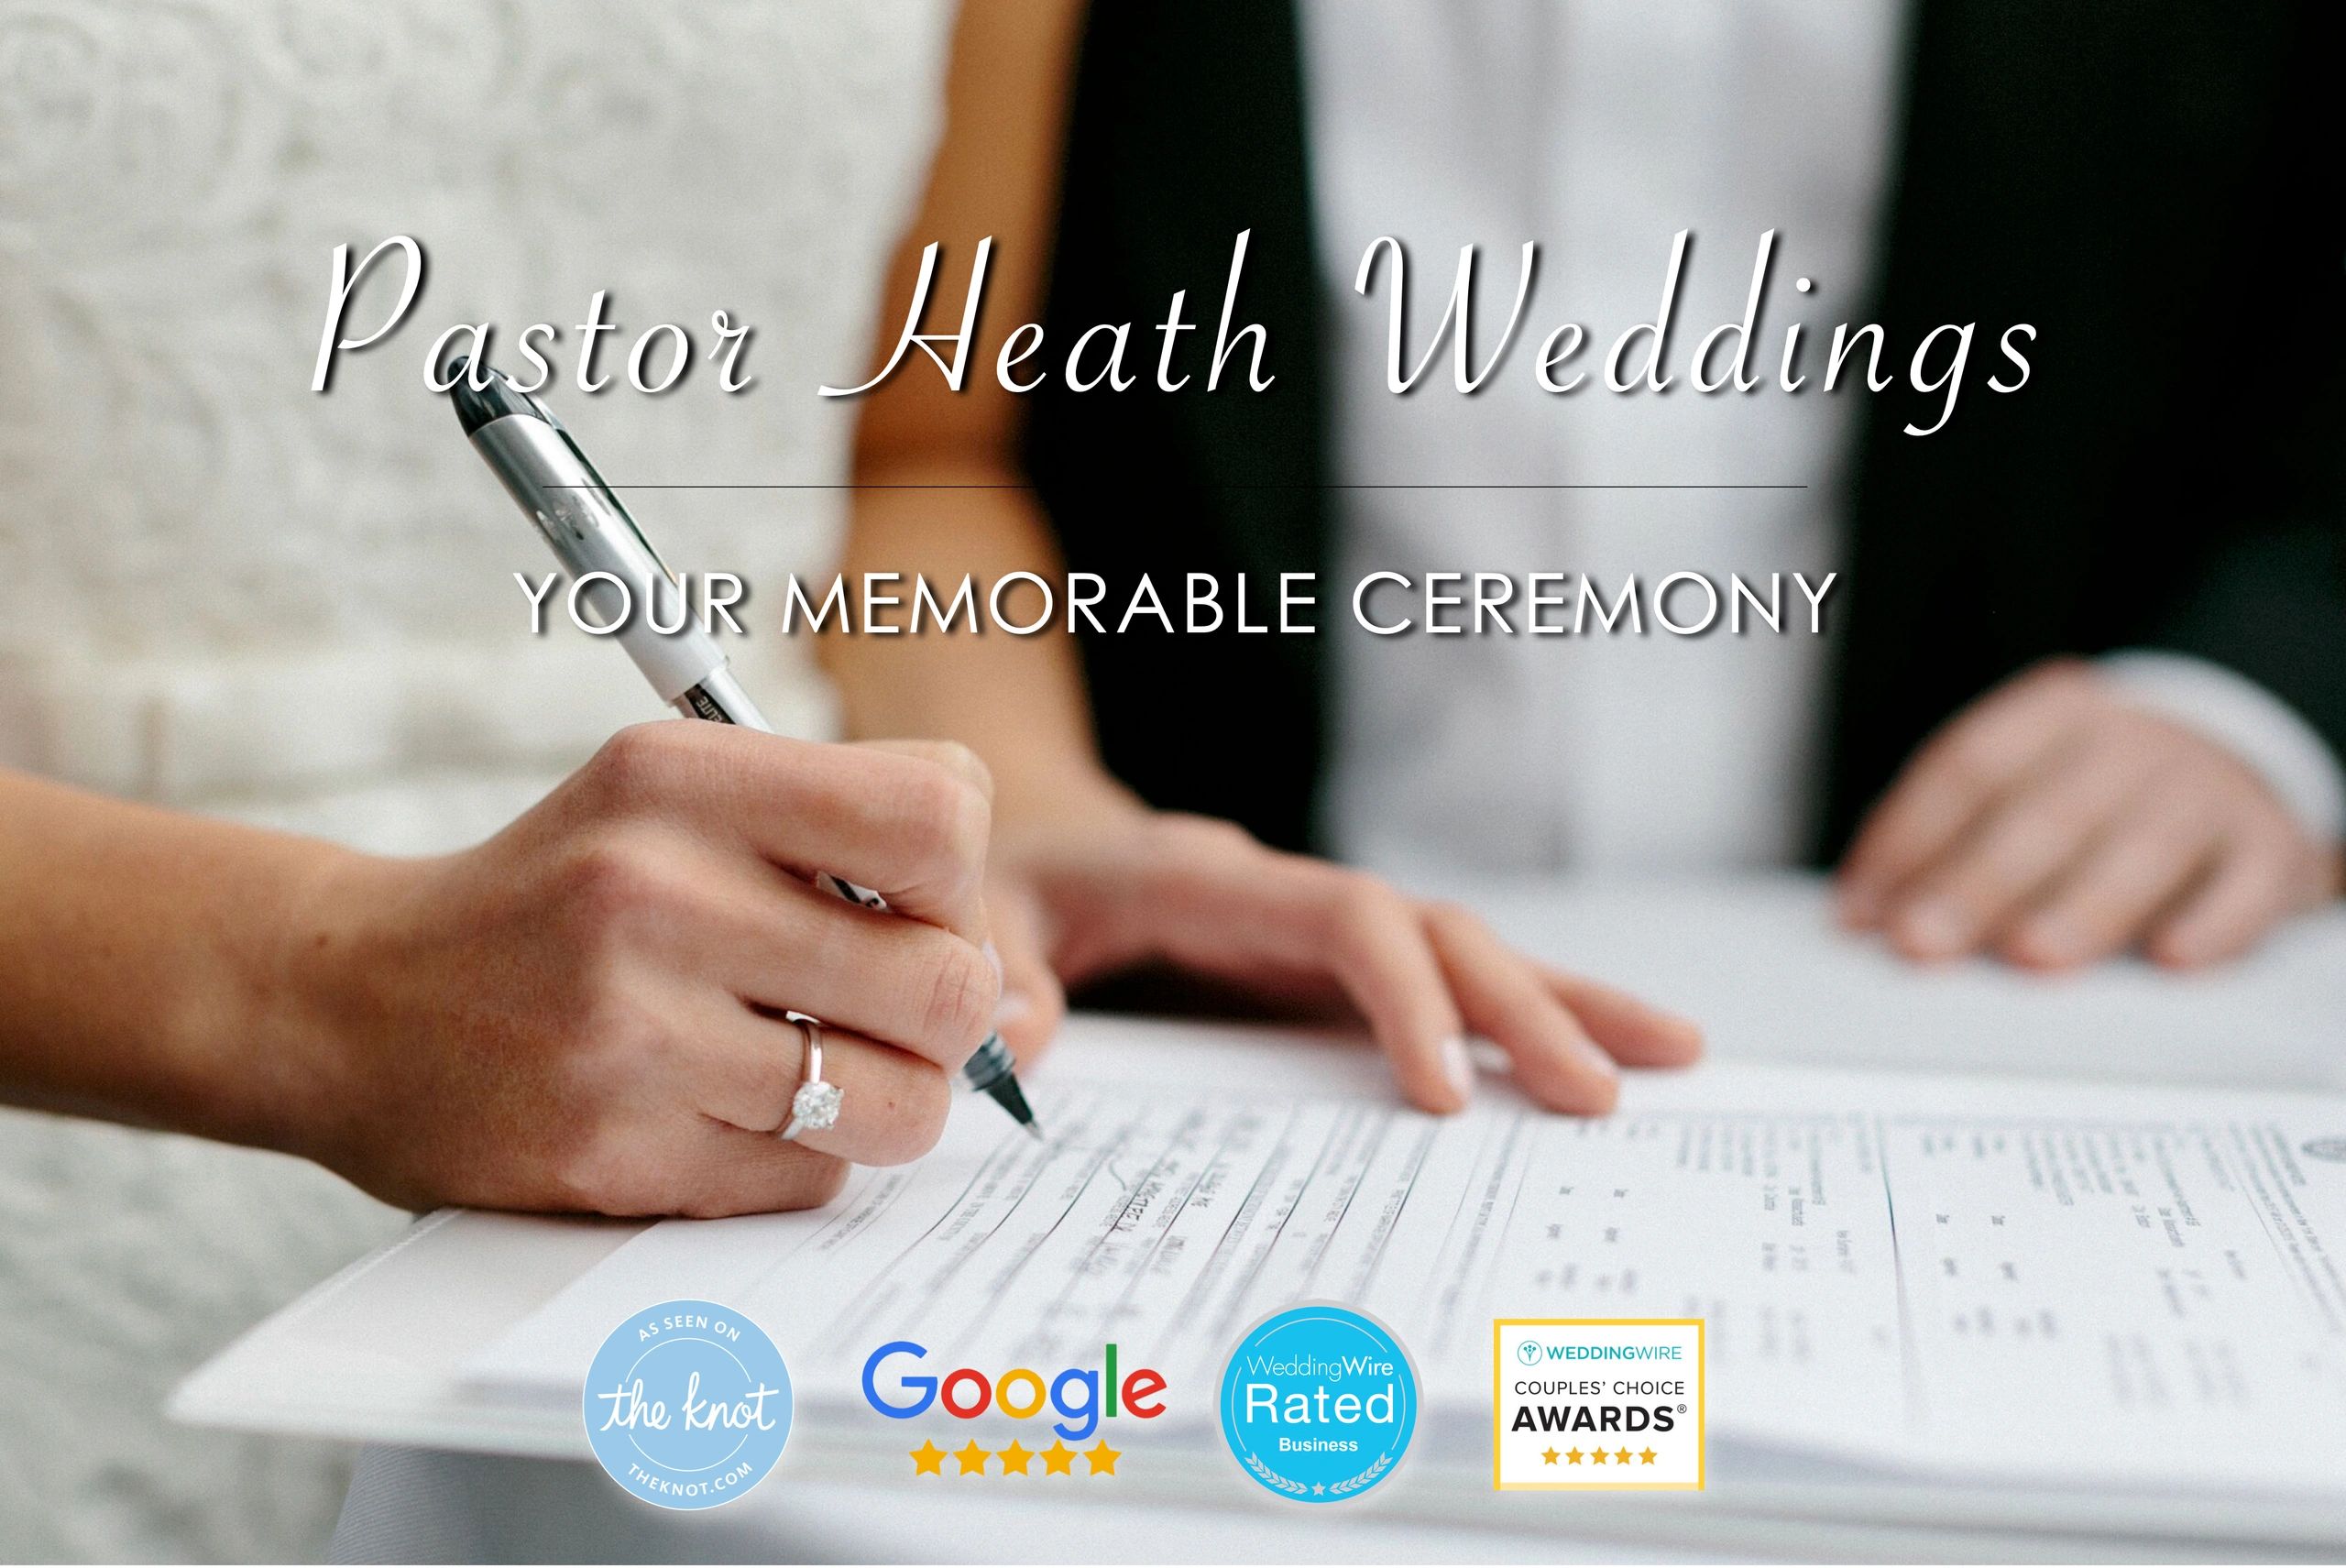 Marriage License by Mail, Weddings, Elopement, Tampa Bay, Same-Sex Wedding, Florida Marriage License